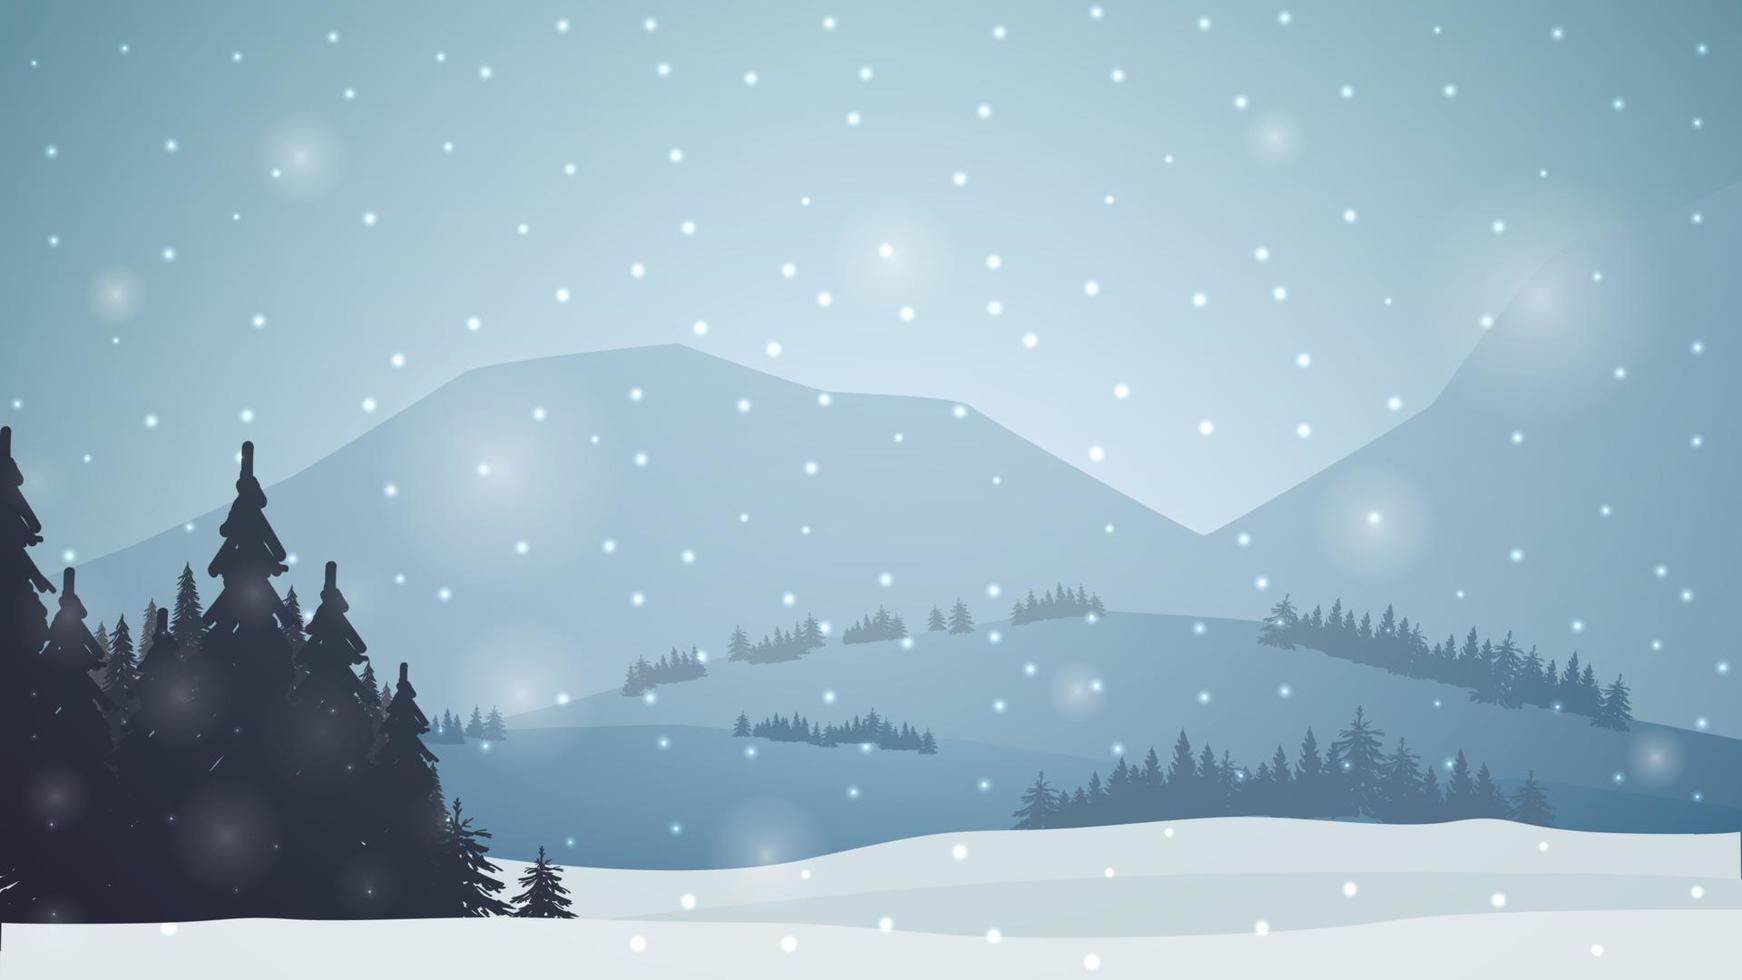 winter-landscape-with-mountains-pines-forest-snow-falling-background-for-your-arts-free-vector